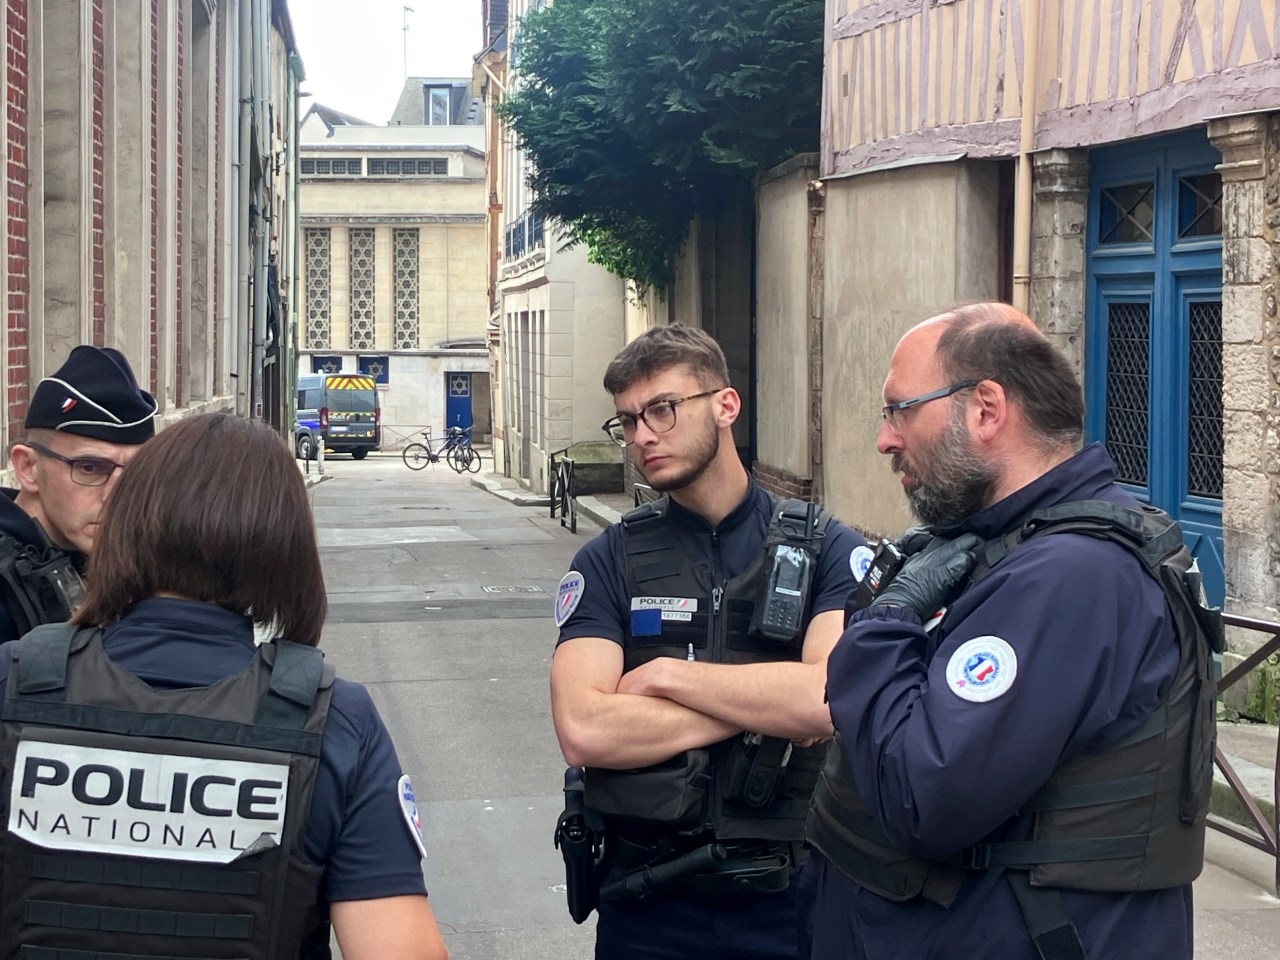 French police fatally shoot a man suspected of setting fire to a synagogue | KLRT [Video]